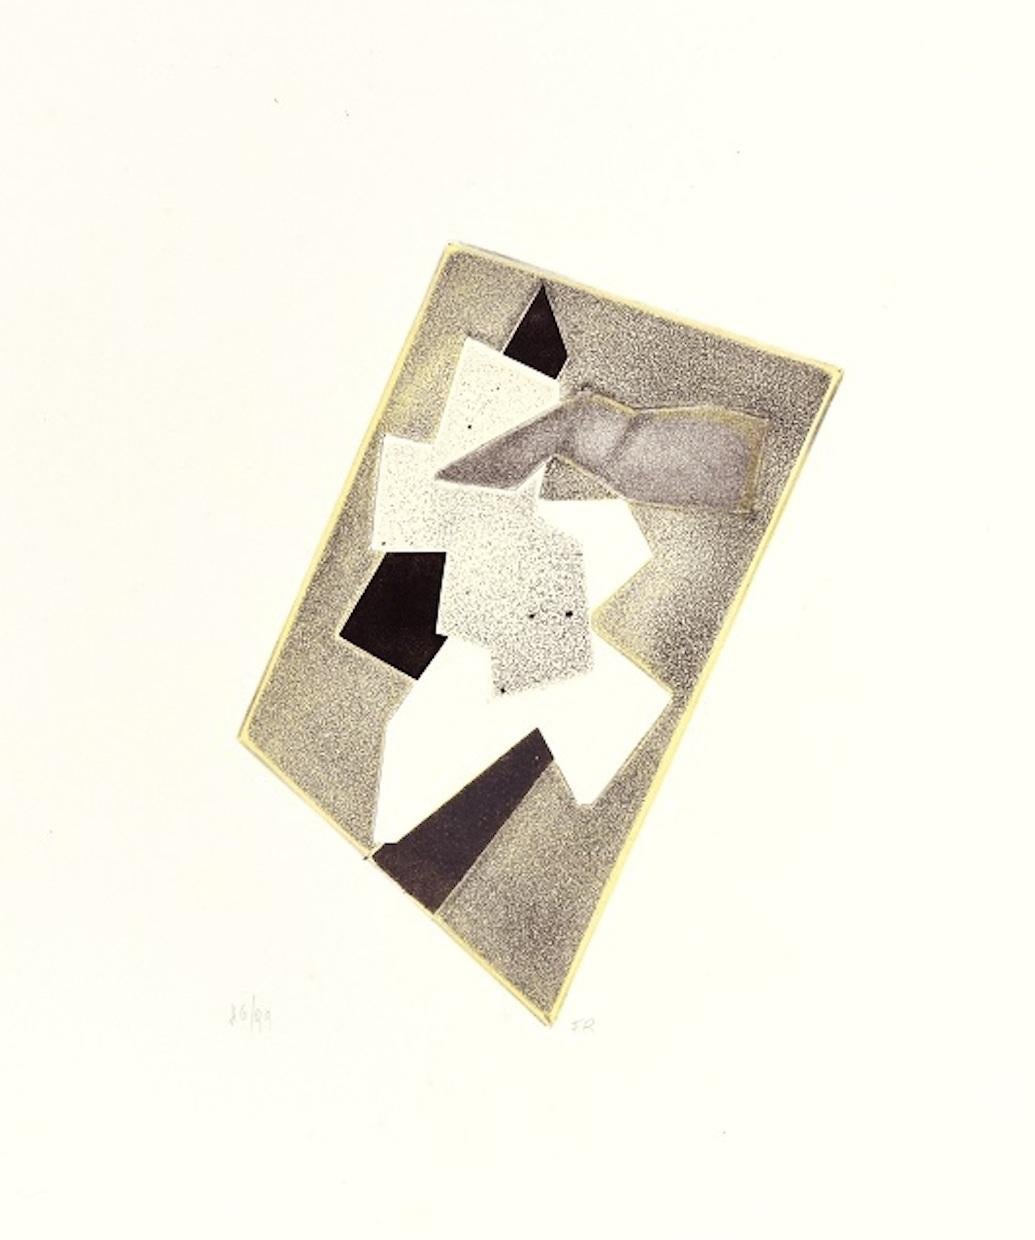 Image dimensions: 20x15 cm. 

Abstract composition is a colored etching and chalcography on paper, realized in the Seventy of XX century by the German artist, Hans Richter, published by La Nuova Foglio, a publishing house of Macerata. 

From a